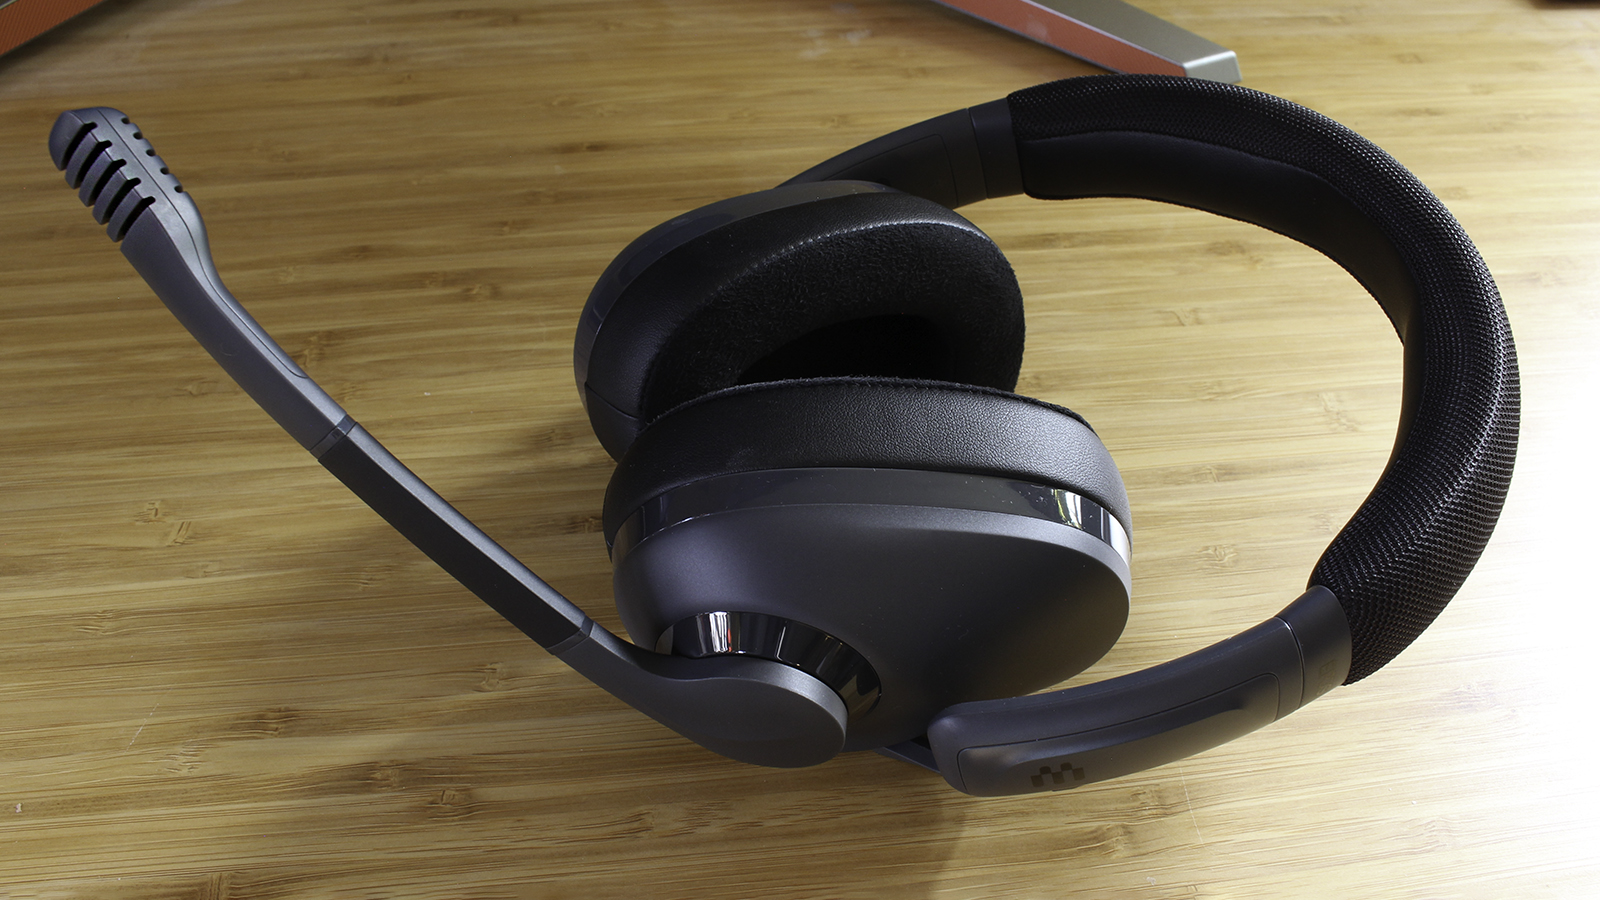 The BEST GAMING HEADSET? EPOS H6 Pro Closed Wired Headset Review 